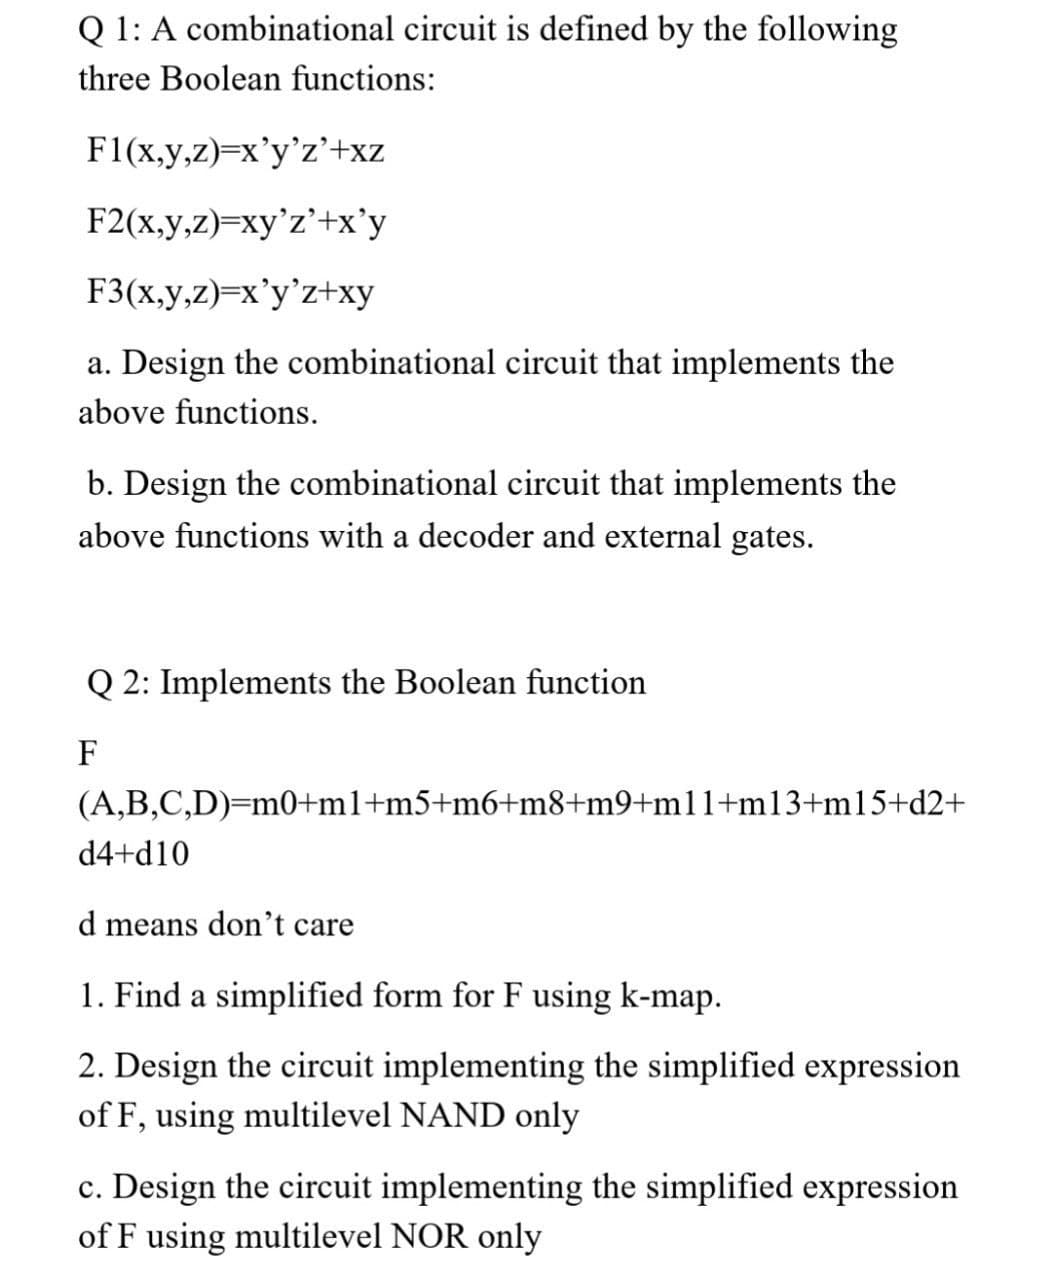 Q 1: A combinational circuit is defined by the following
three Boolean functions:
F1(x,y,z)=x'y'z'+xz
F2(x,y,z)=xy'z'+x'y
F3(x,y,z)=x'y'z+xy
a. Design the combinational circuit that implements the
above functions.
b. Design the combinational circuit that implements the
above functions with a decoder and external gates.
Q 2: Implements the Boolean function
F
(A,B,C,D)=m0+m1+m5+m6+m8+m9+m11+m13+m15+d2+
d4+d10
d means don't care
1. Find a simplified form for F using k-map.
2. Design the circuit implementing the simplified expression
of F, using multilevel NAND only
c. Design the circuit implementing the simplified expression
of F using multilevel NOR only
